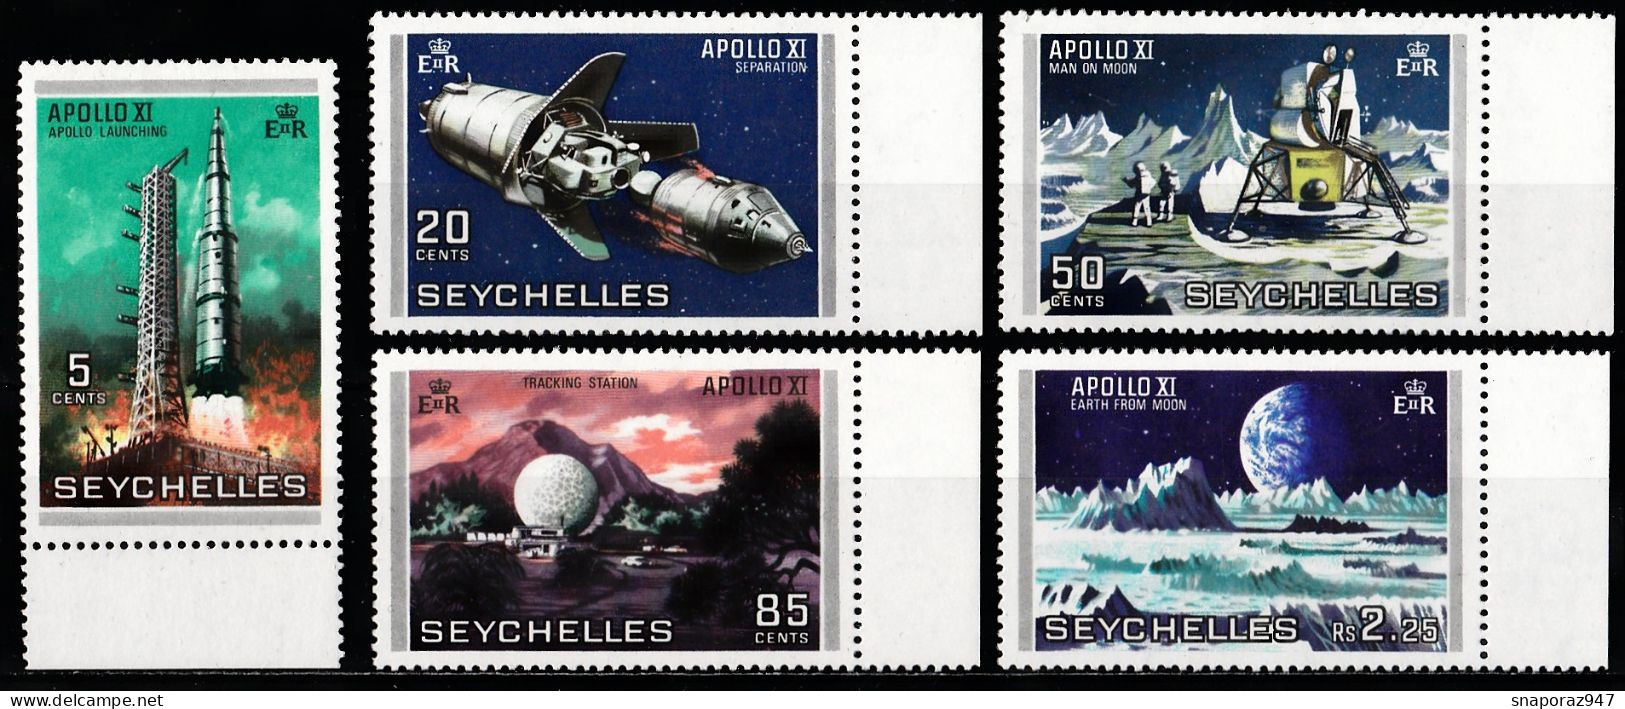 1969 Seychelles Apollo XI The Man On The Moon Space Set MNH** Tr148 - Africa